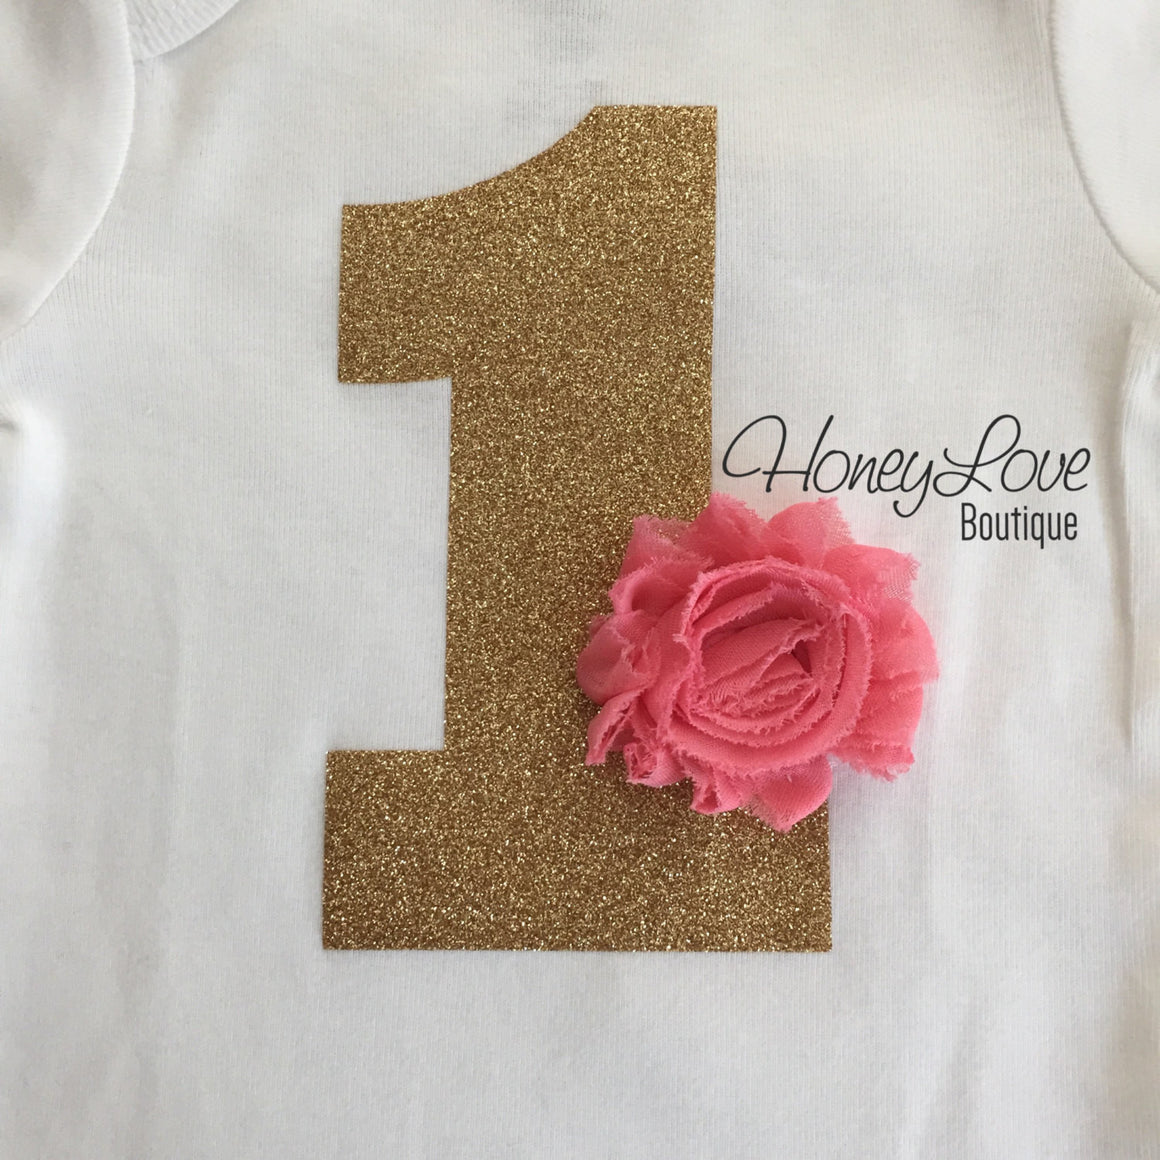 Birthday Bodysuit - Gold or Silver 1 with flower accent (choose color!) - HoneyLoveBoutique